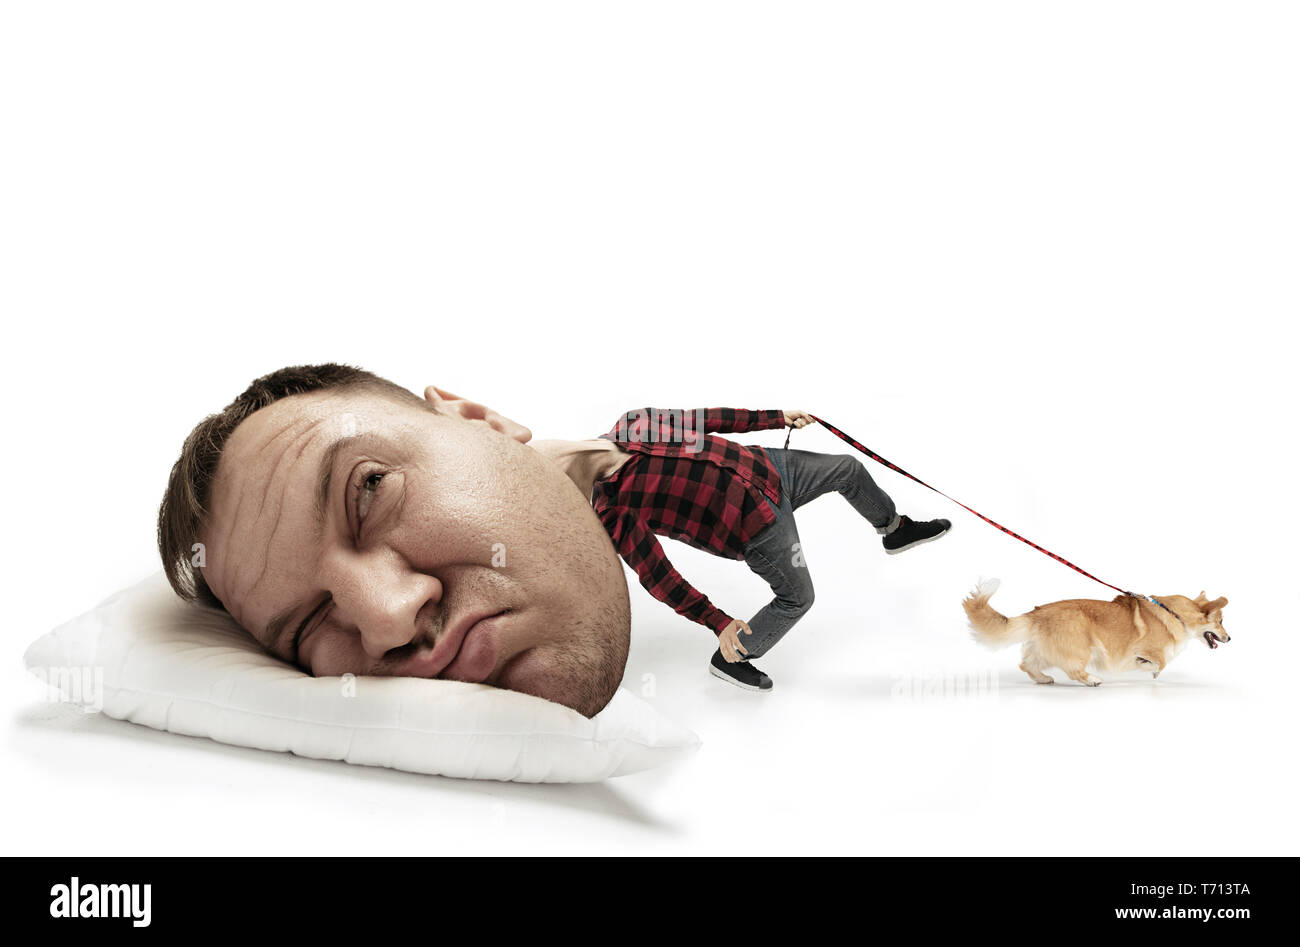 Street is calling, let's run. Big head on small body lying on the pillow. Man with little corgi cannot wake up 'cause headache and overslept. Concept of employment, hurrying up, time limits, vertigo. Stock Photo